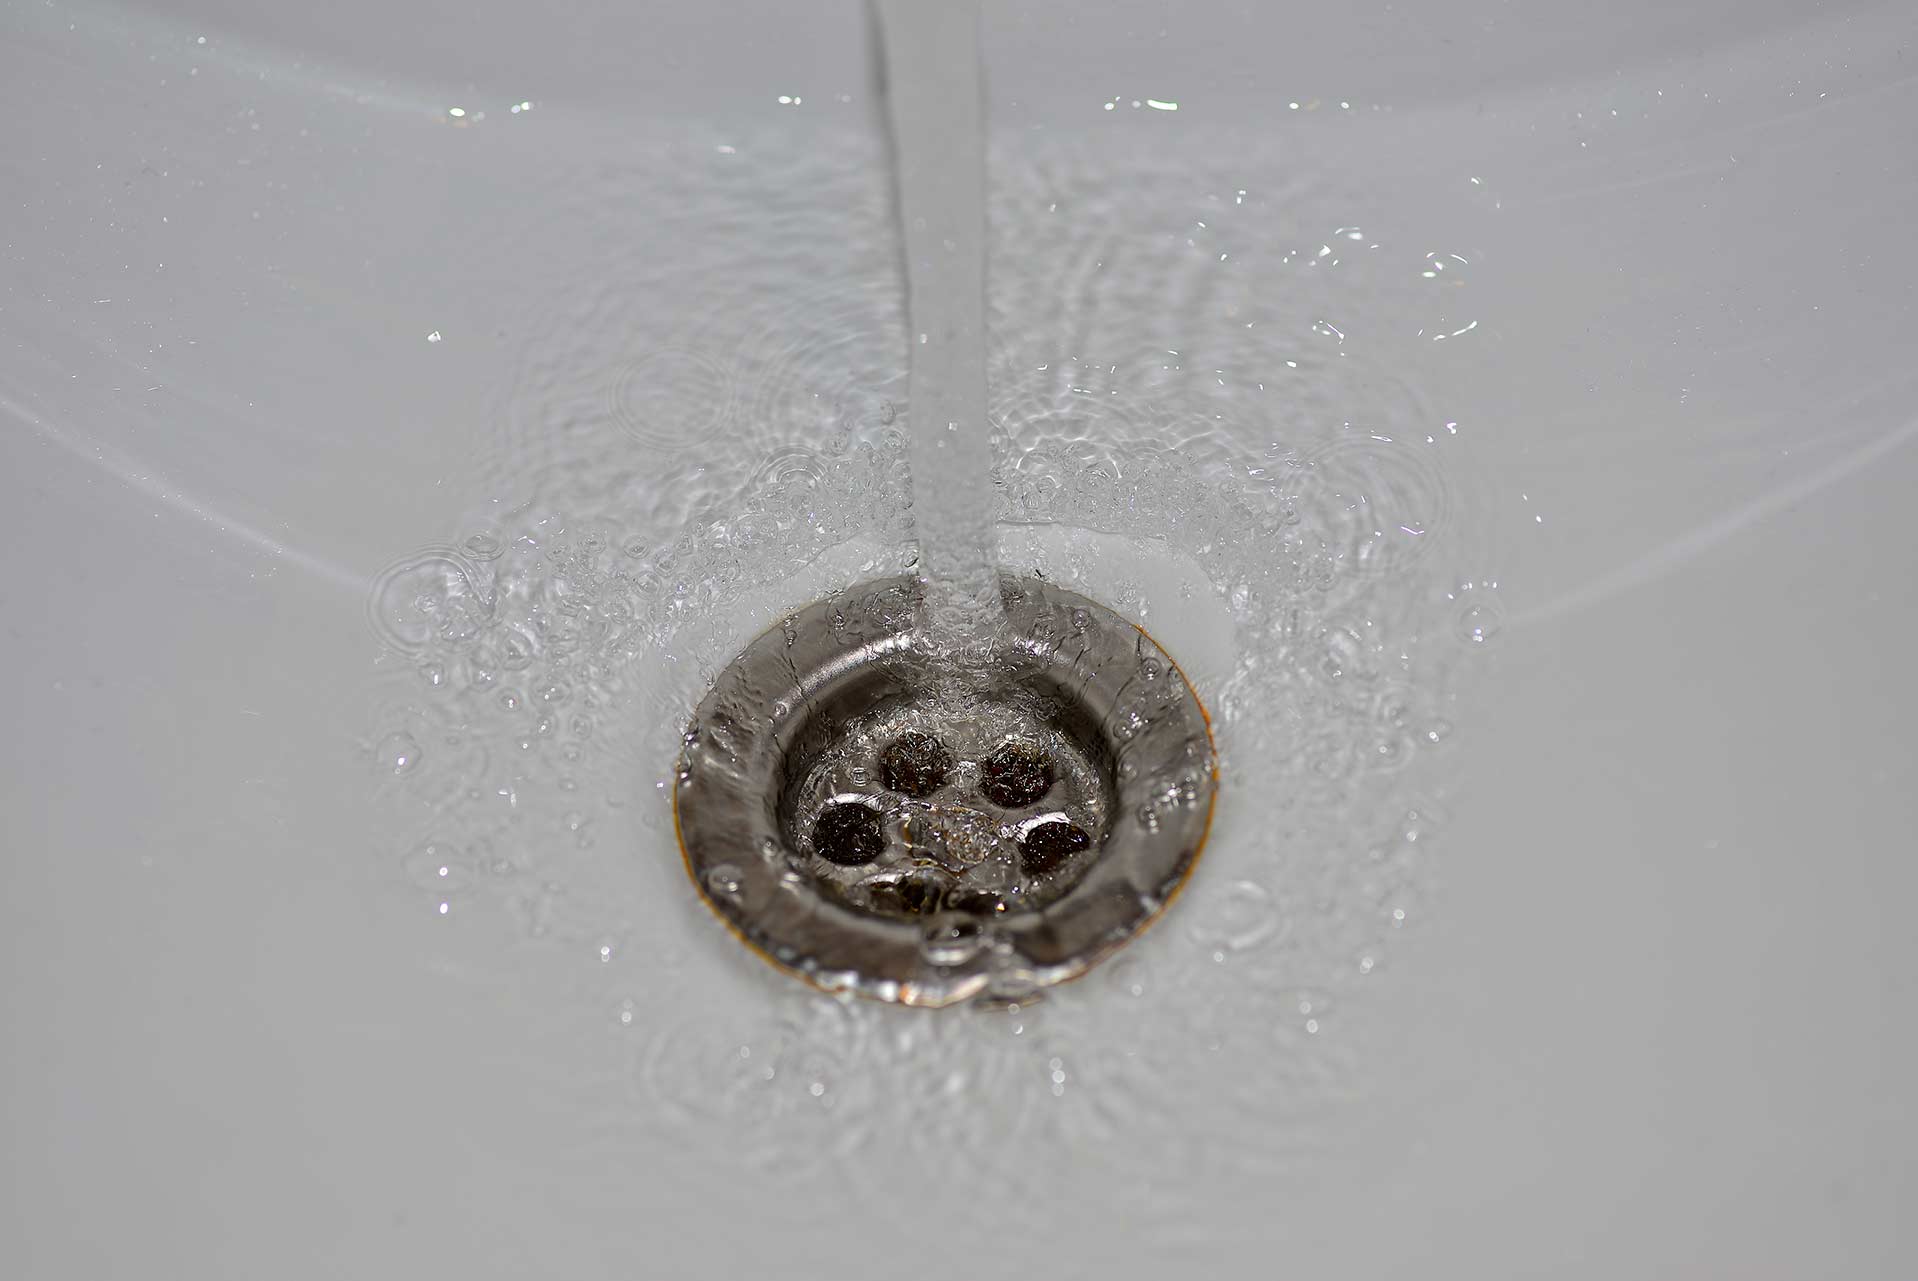 A2B Drains provides services to unblock blocked sinks and drains for properties in Hackney.